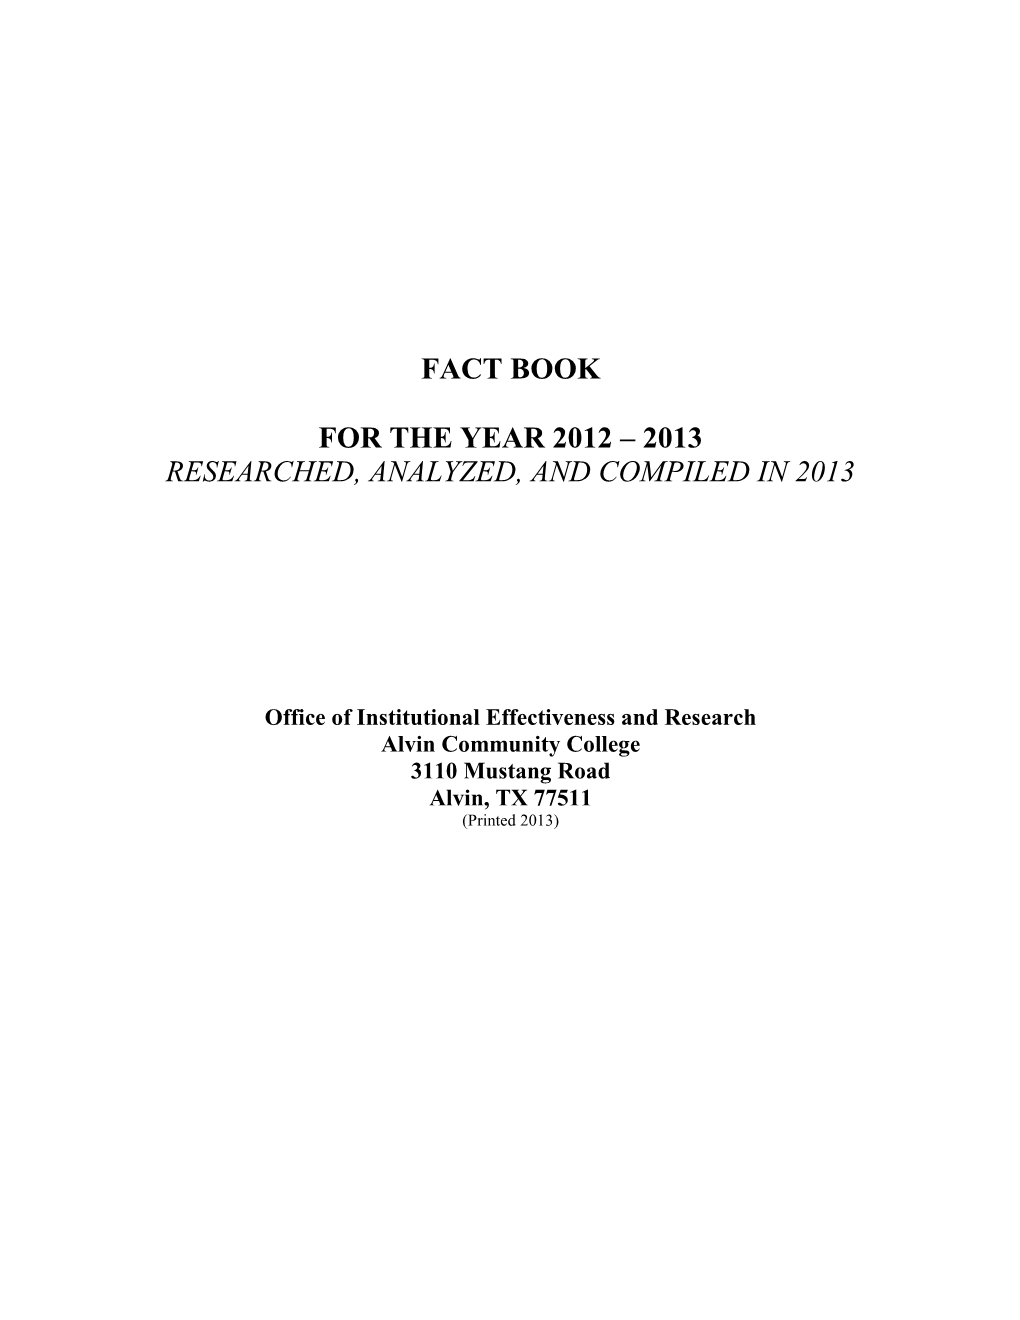 Fact Book for the Year 2012 – 2013 Researched, Analyzed